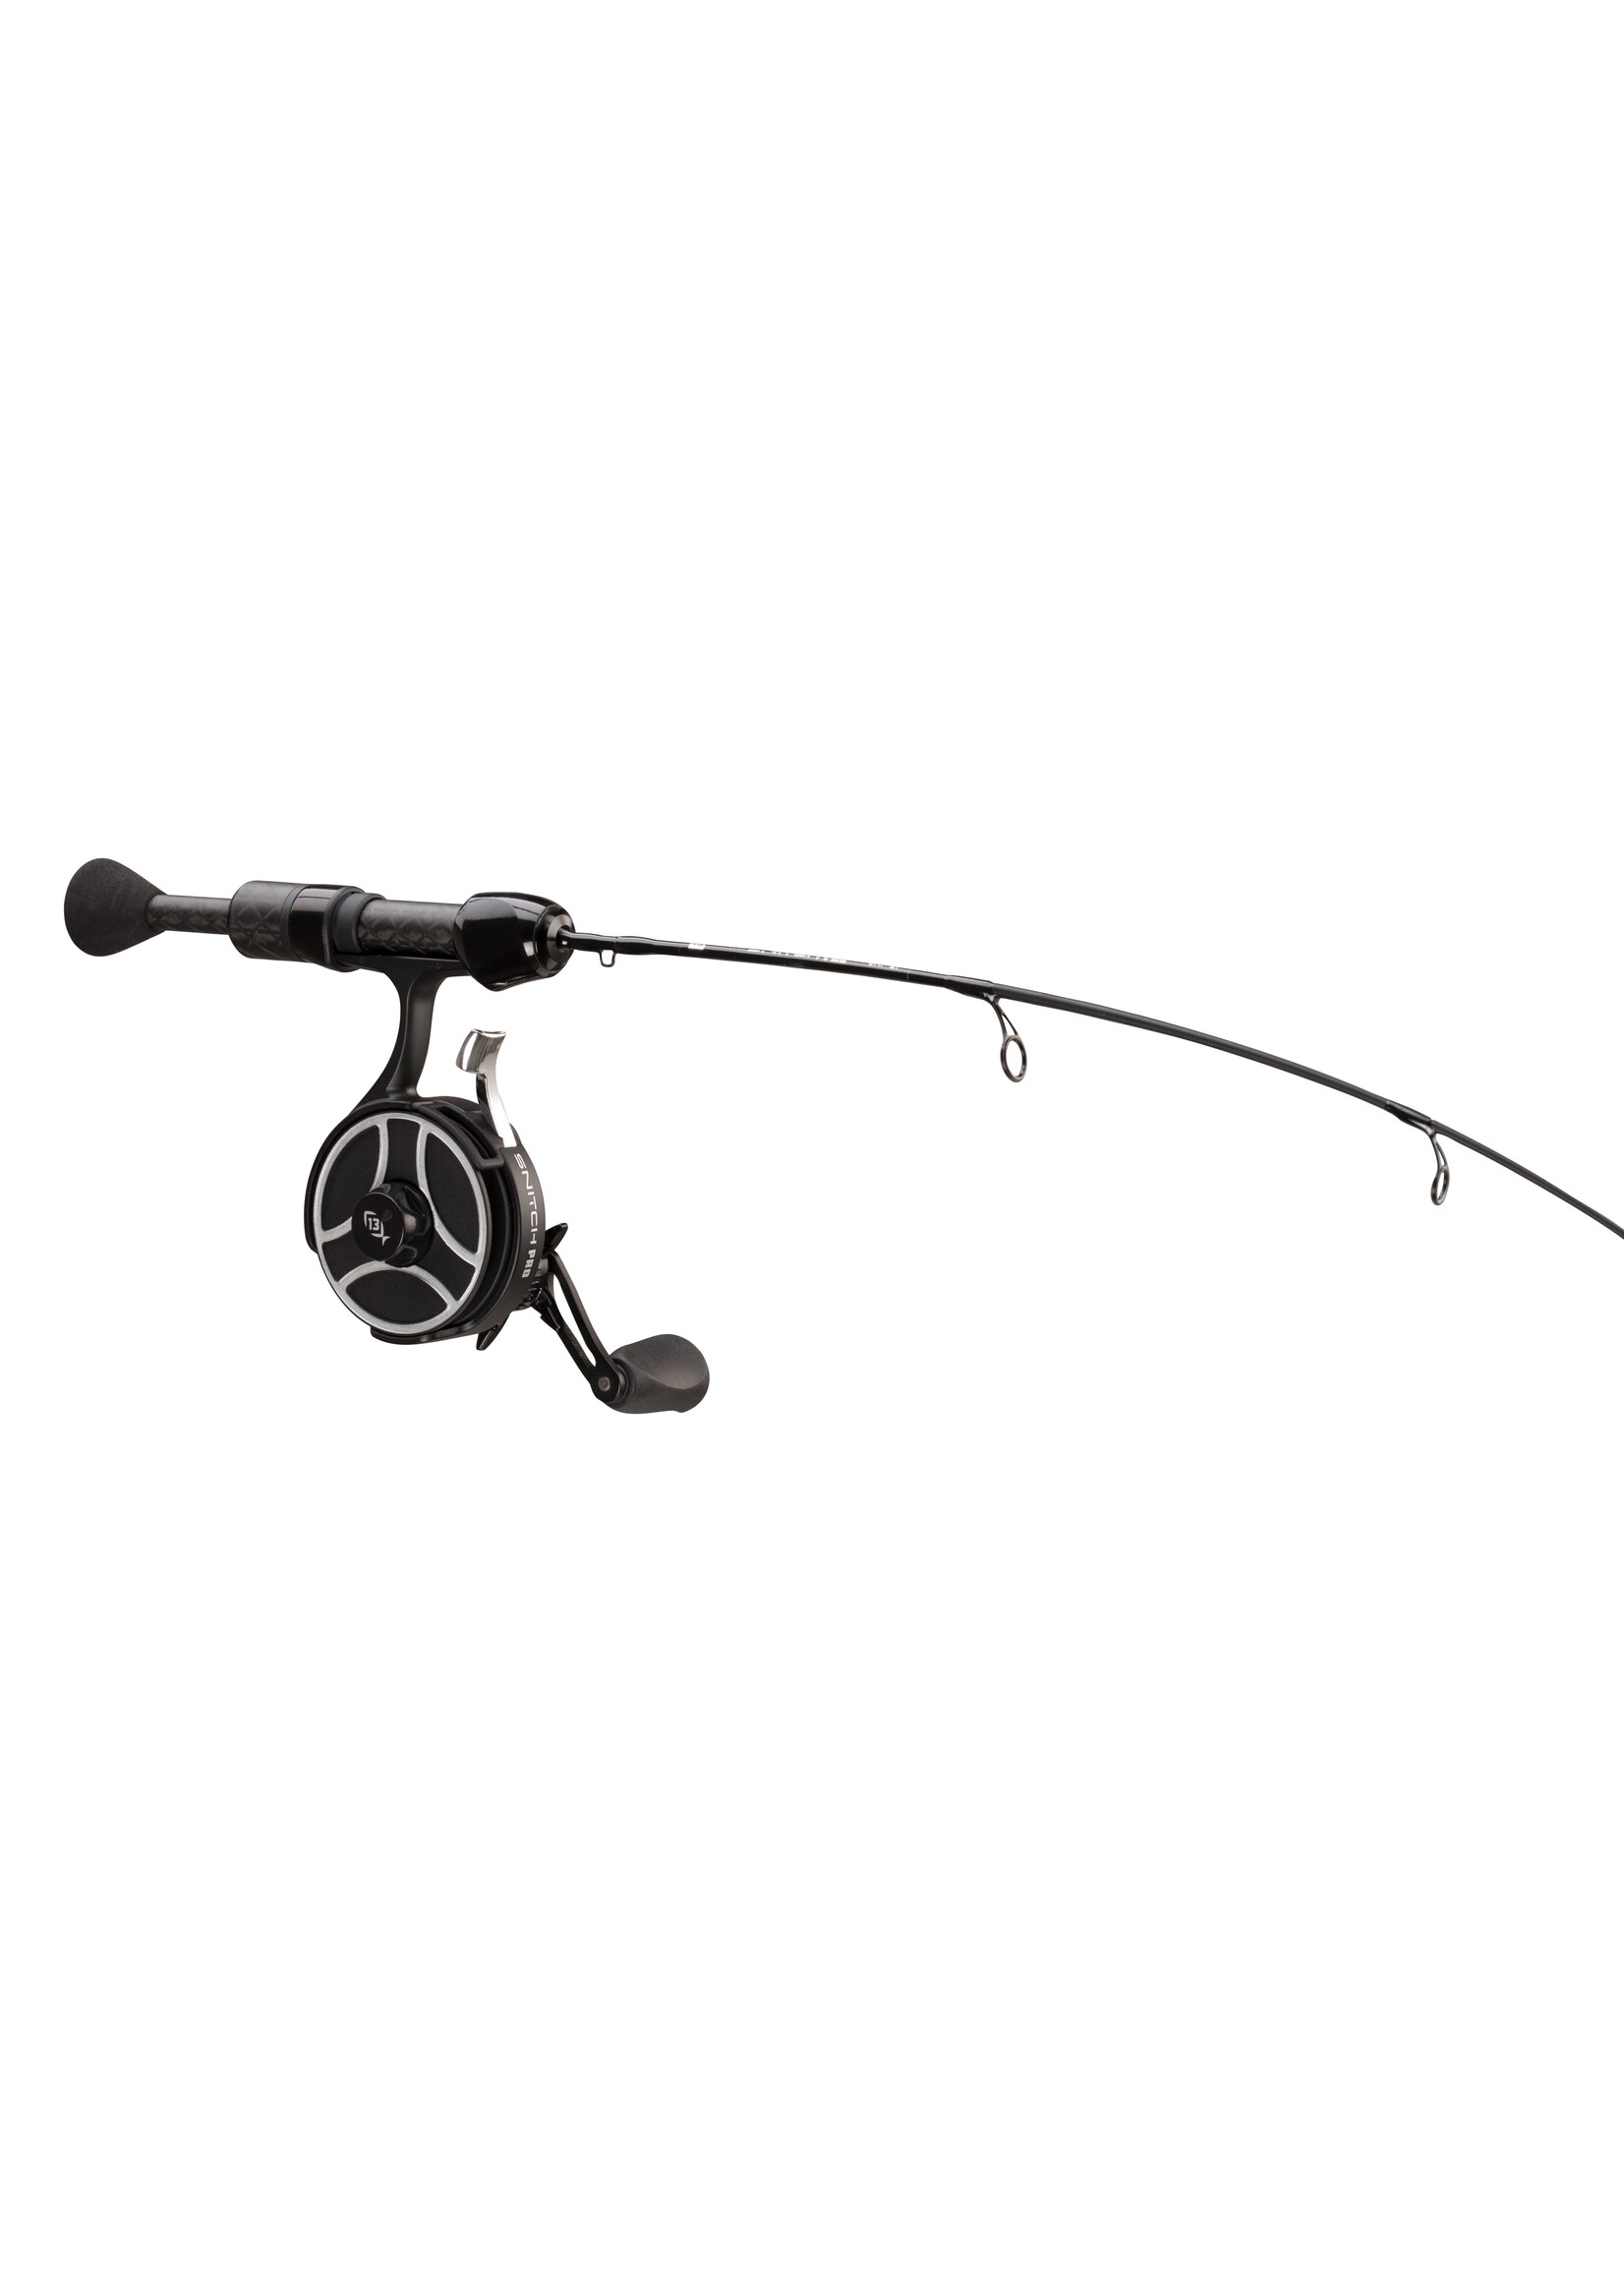 13 Fishing The Snitch Pro/Freefall Ghost Inline Ice Combo - Tackle